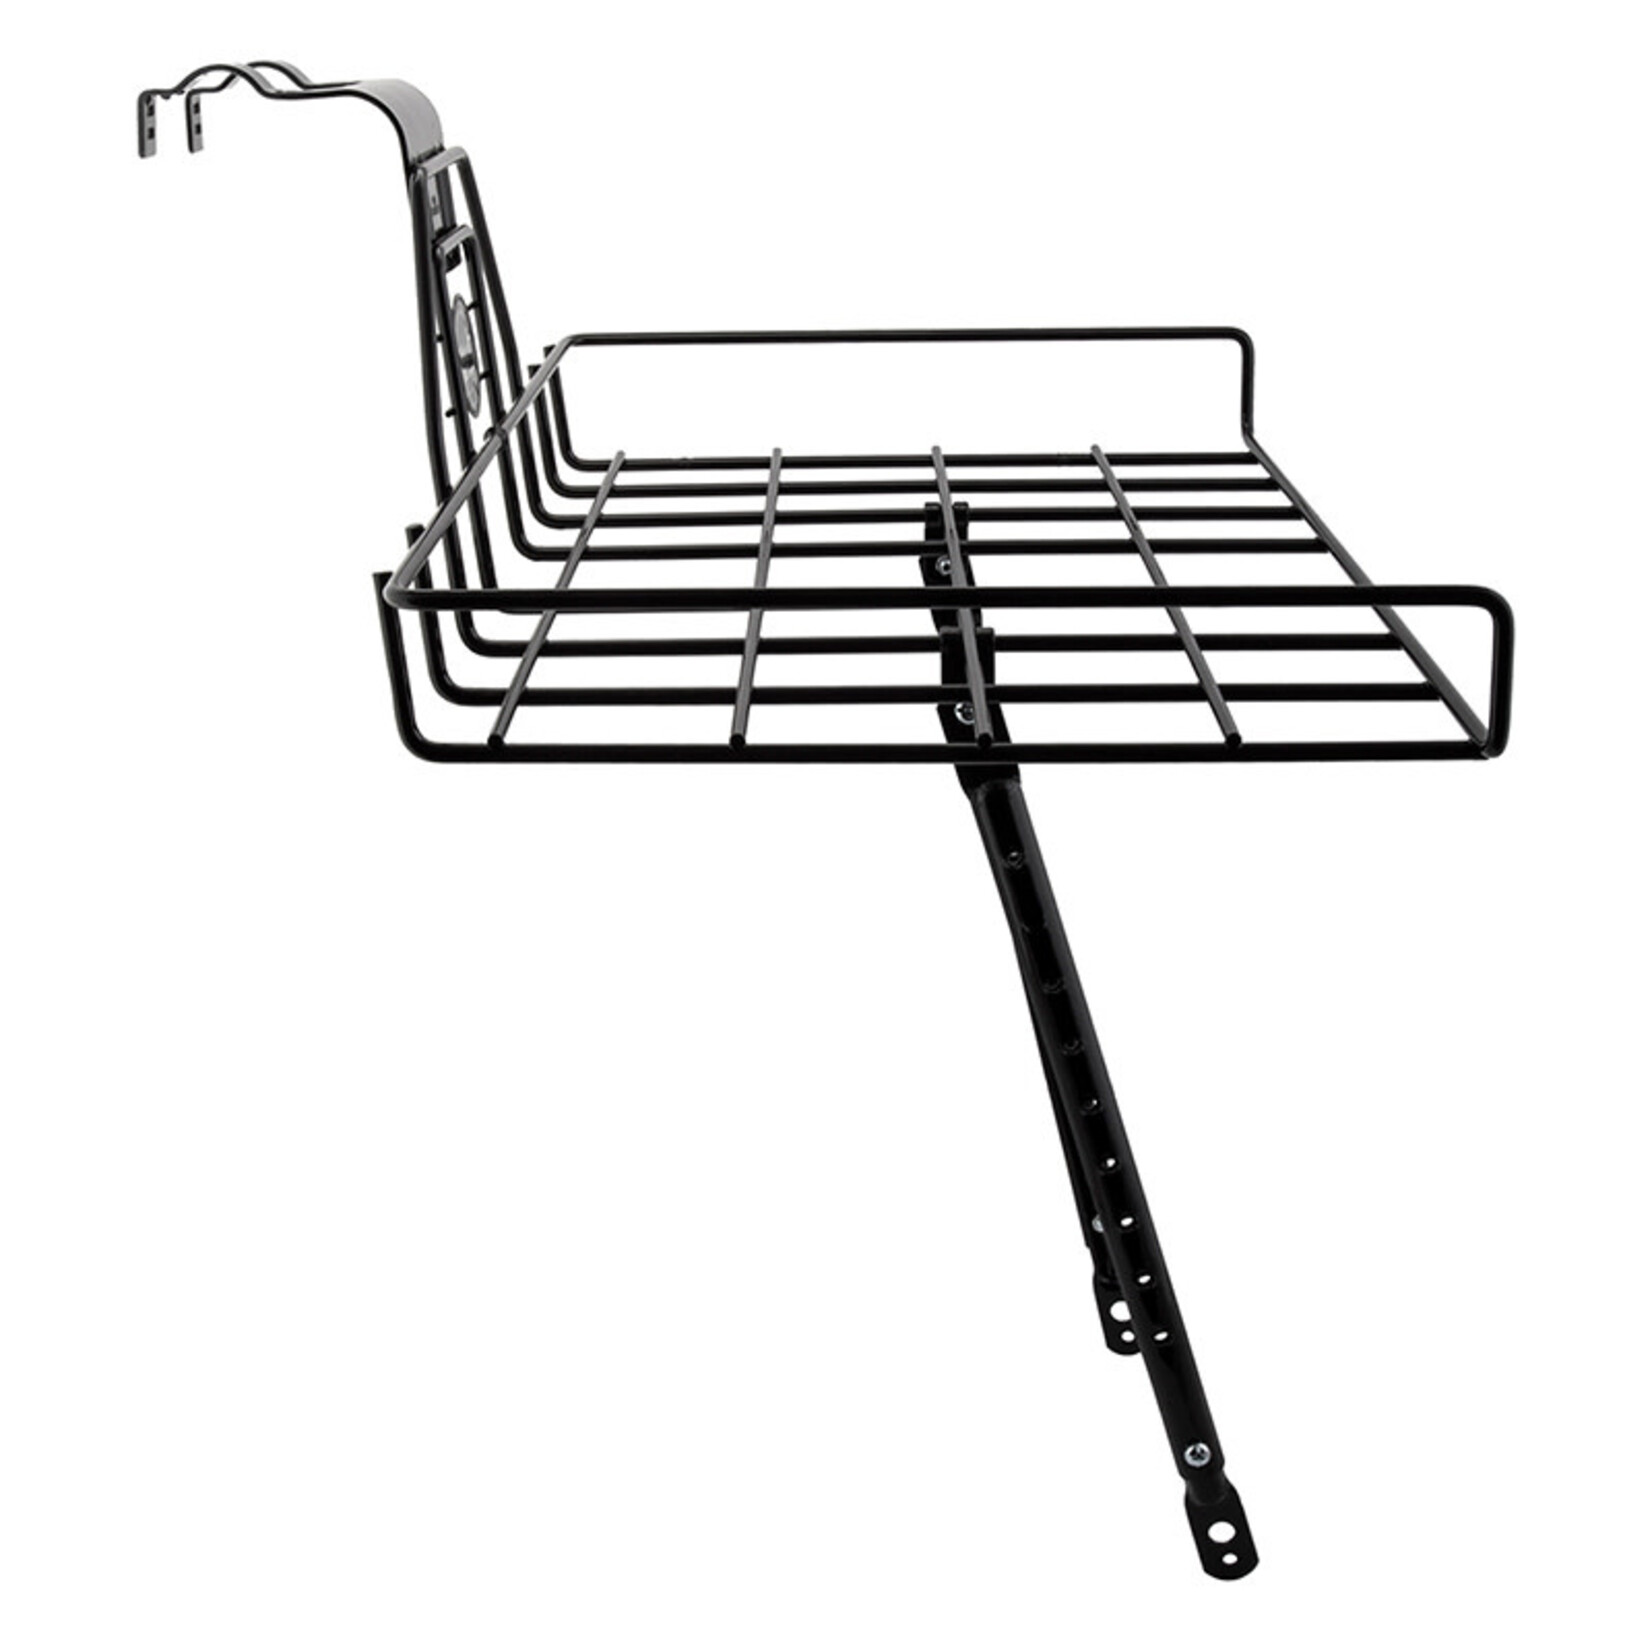 WALD PRODUCTS Wald Pizza RACK FronT 257GB STeeL BlacK